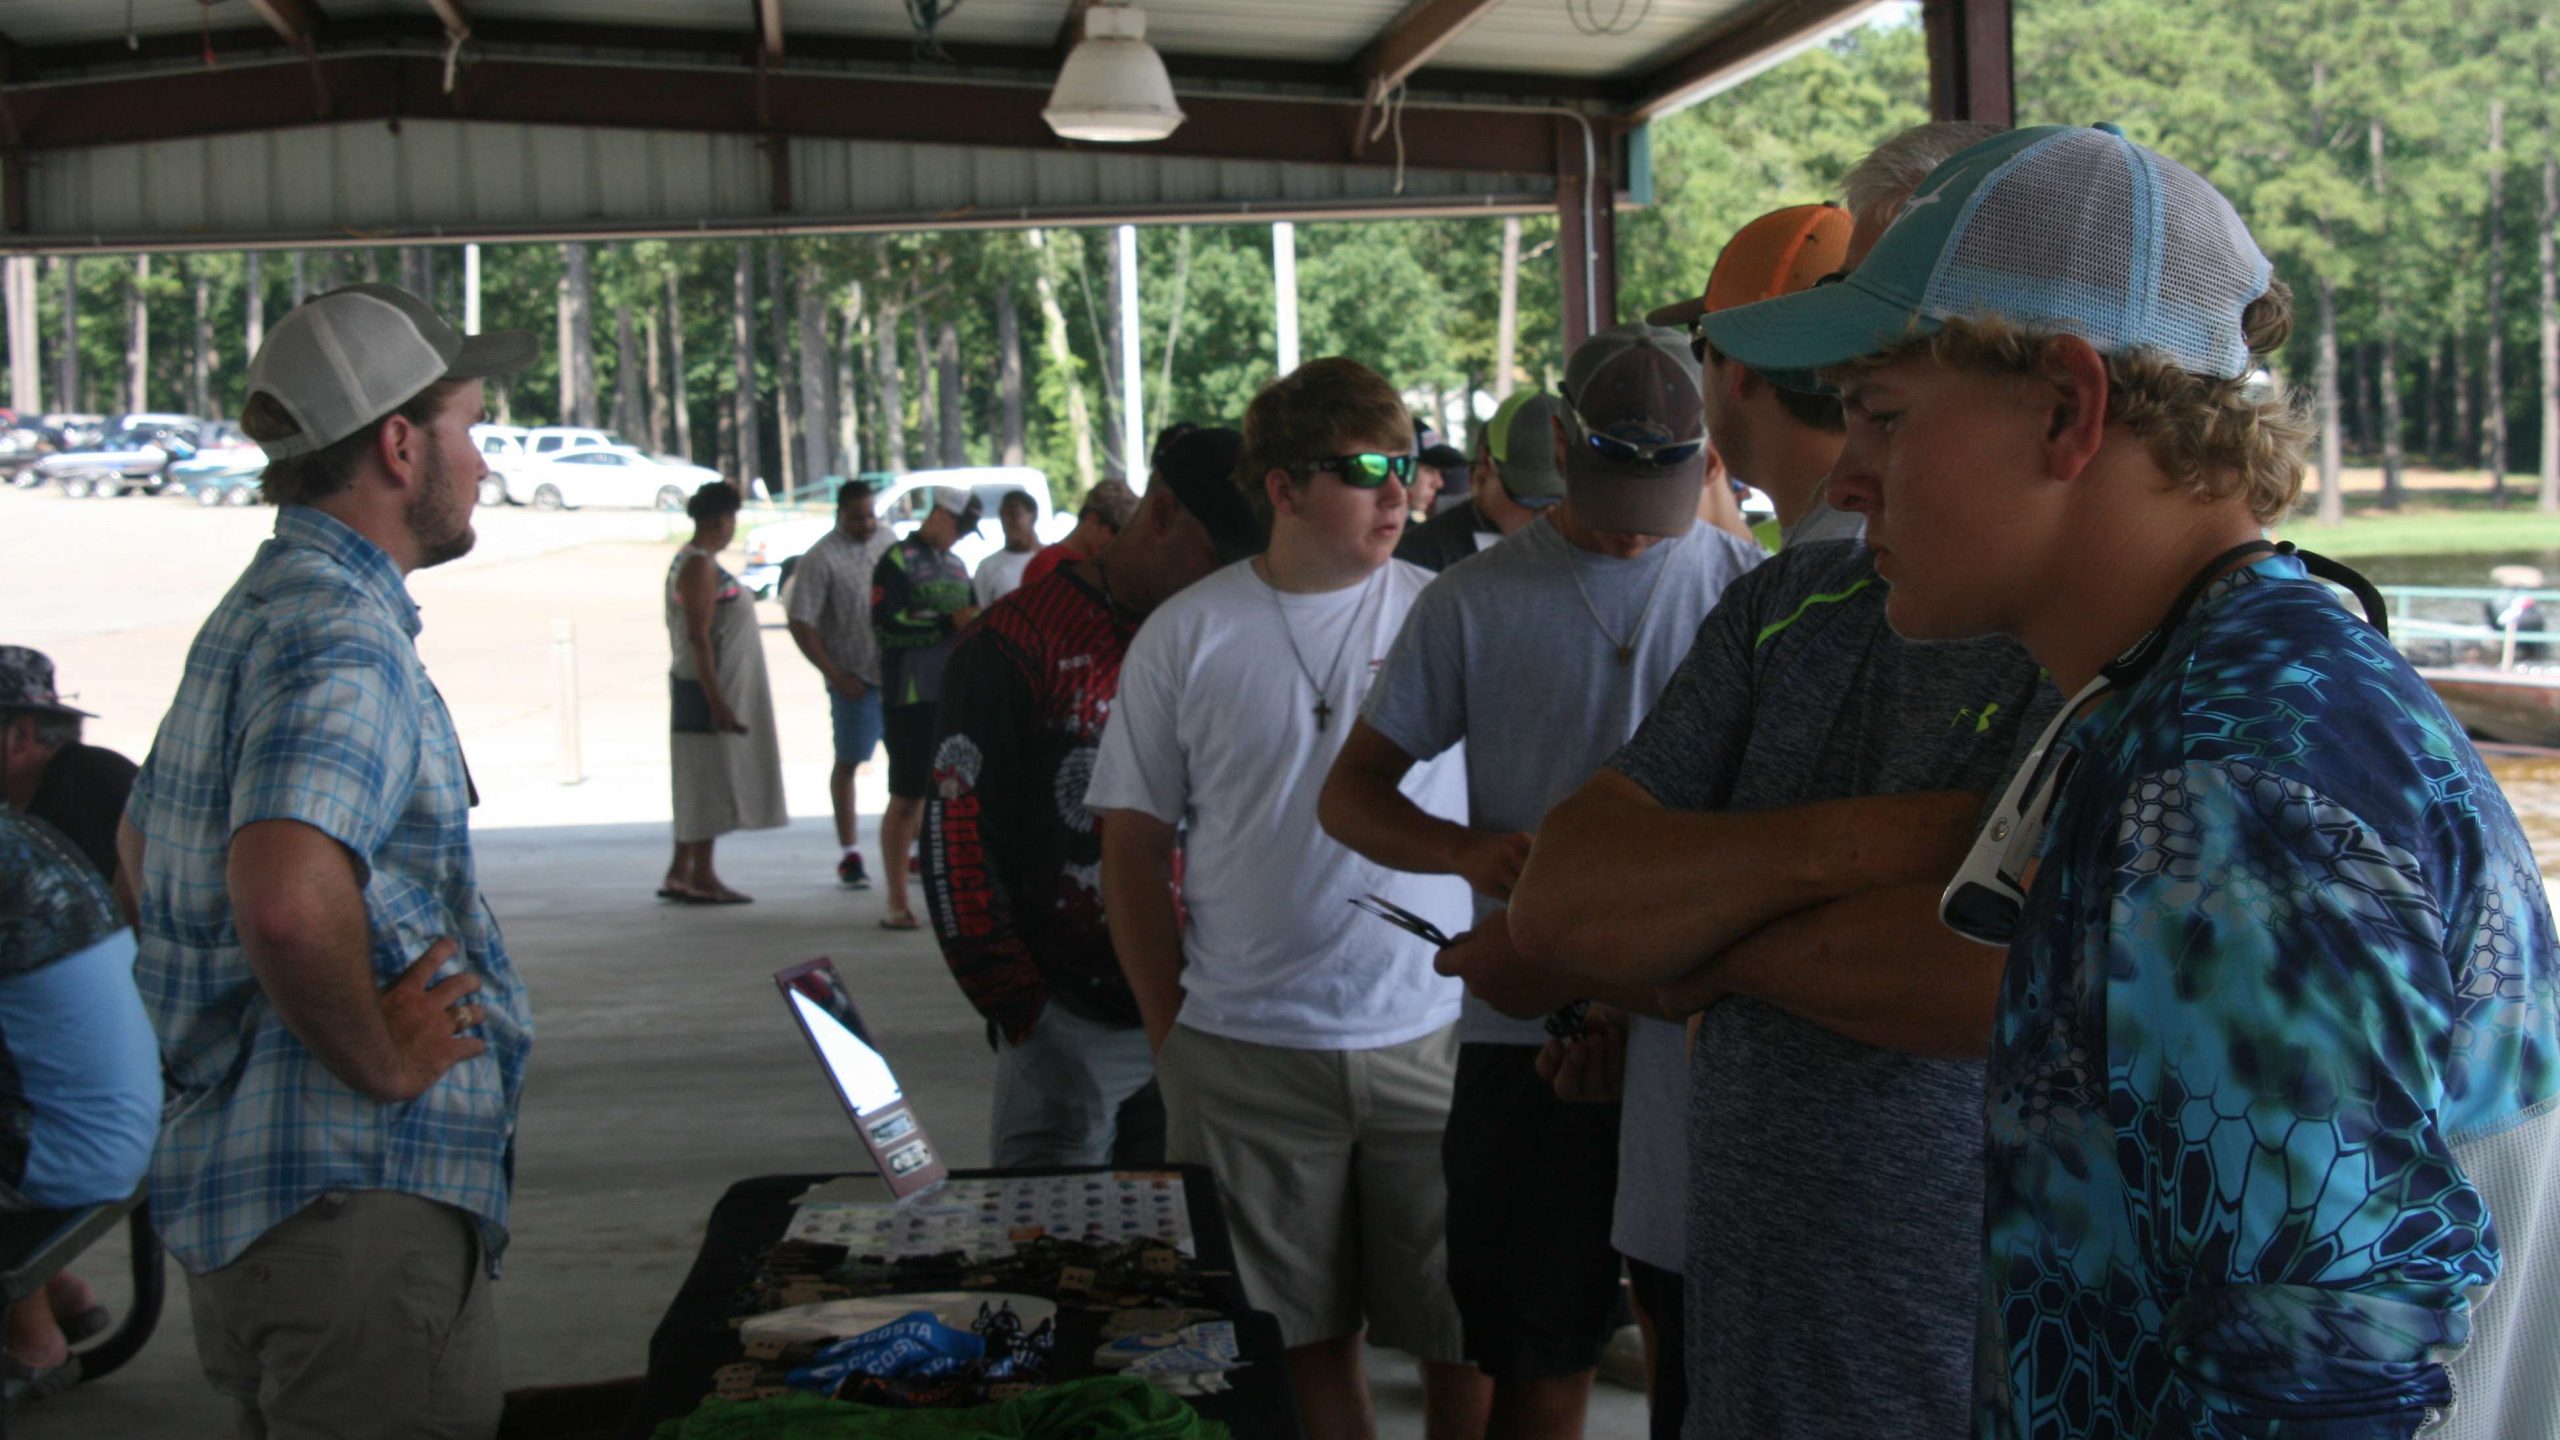 The line continues to grow at the pavilion at Cypress Bend Marina.